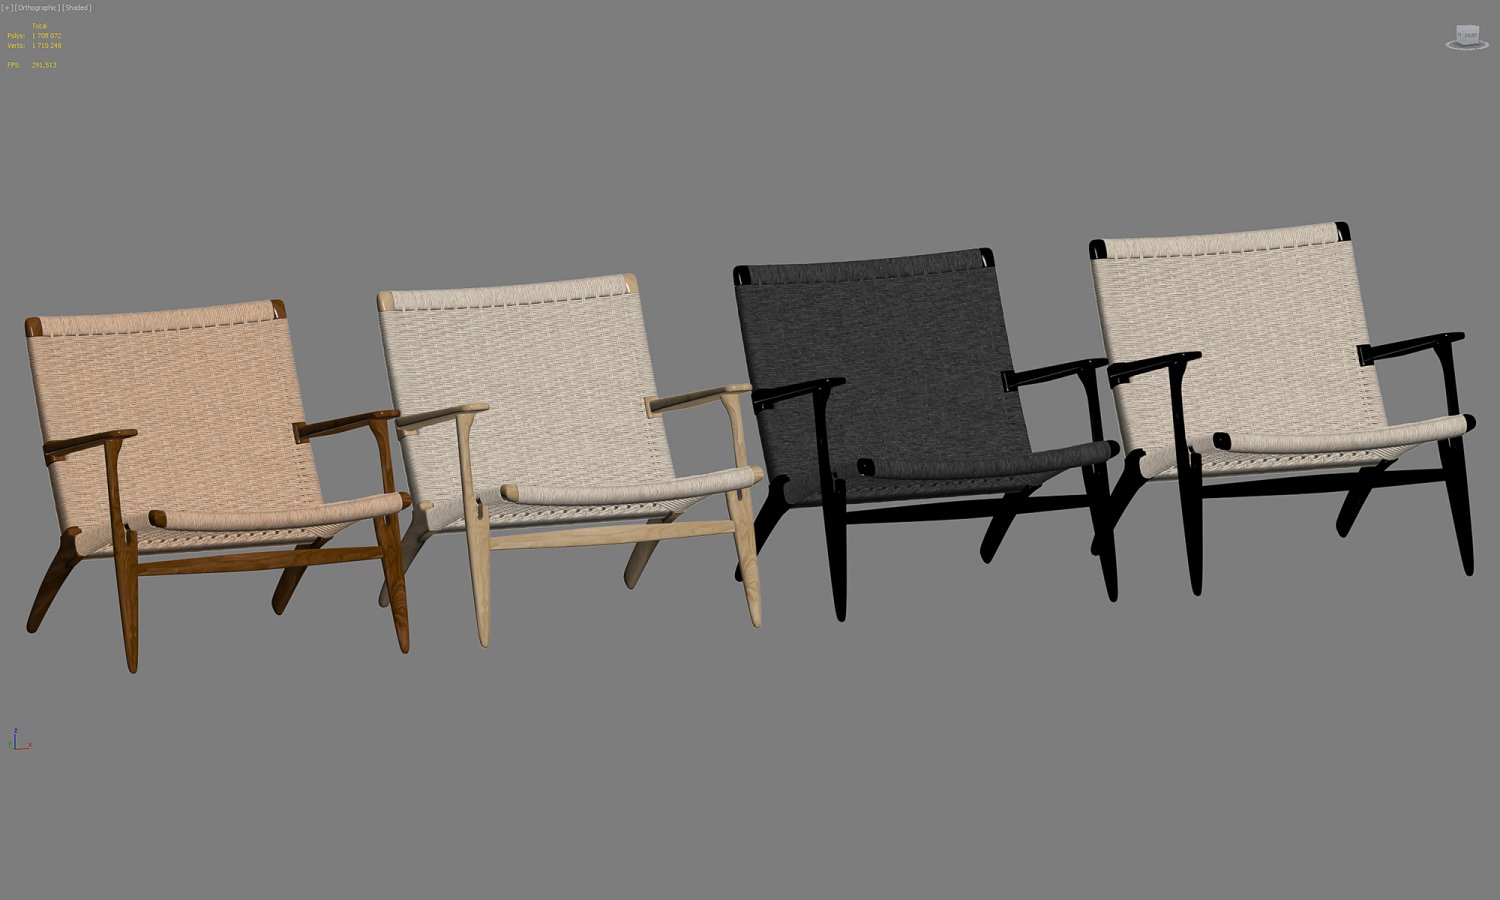 There is four chairs. Monobloc Chair photos.